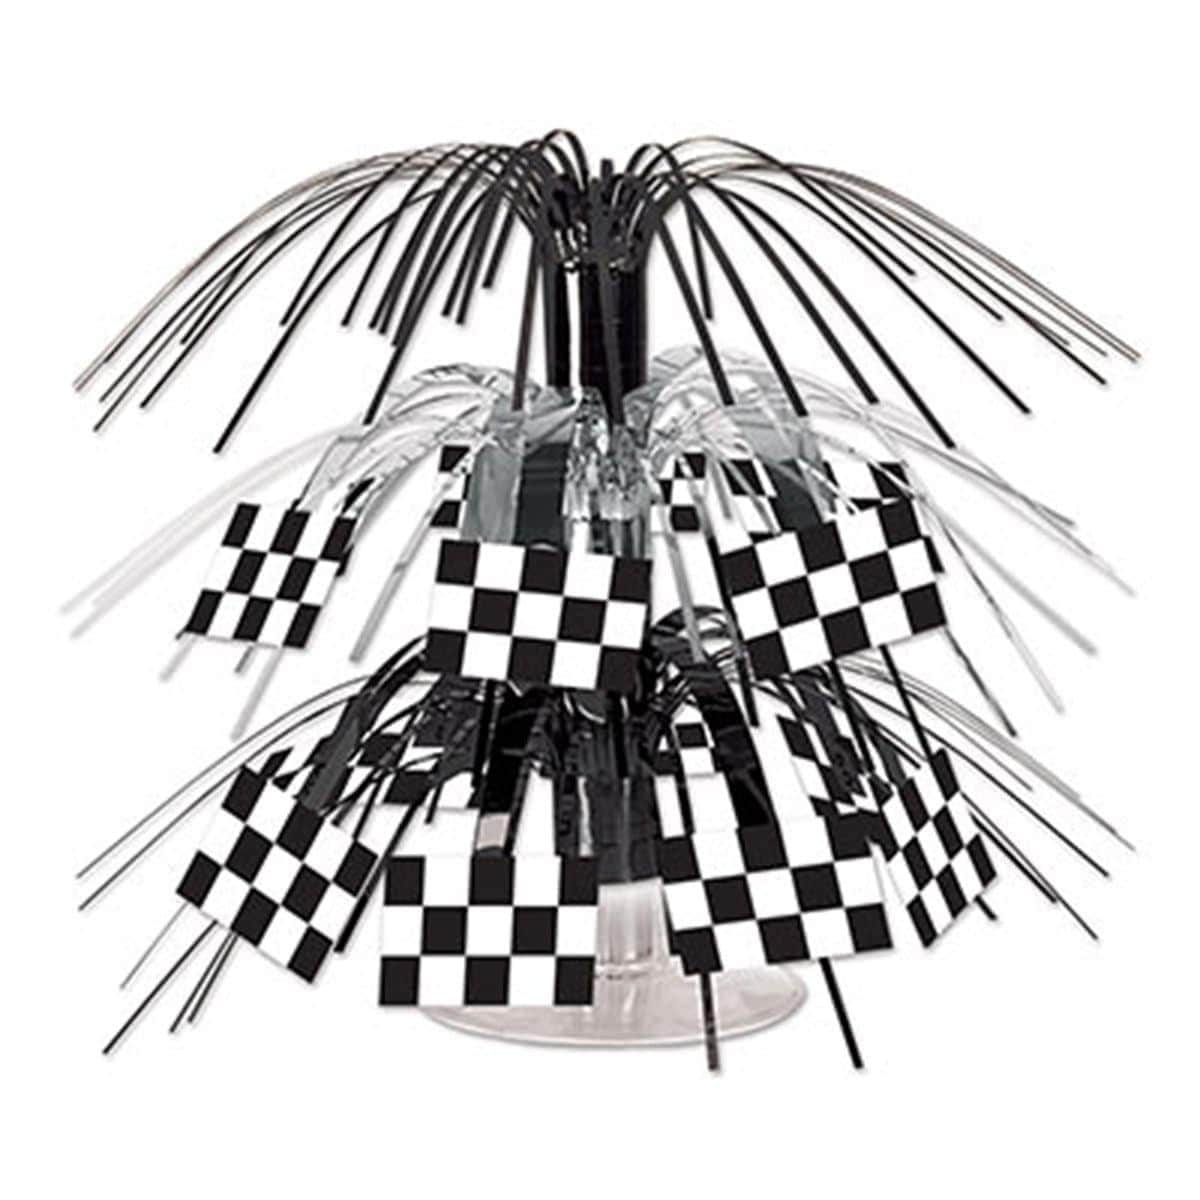 Buy Theme Party Checkered Flag Centerpiece sold at Party Expert